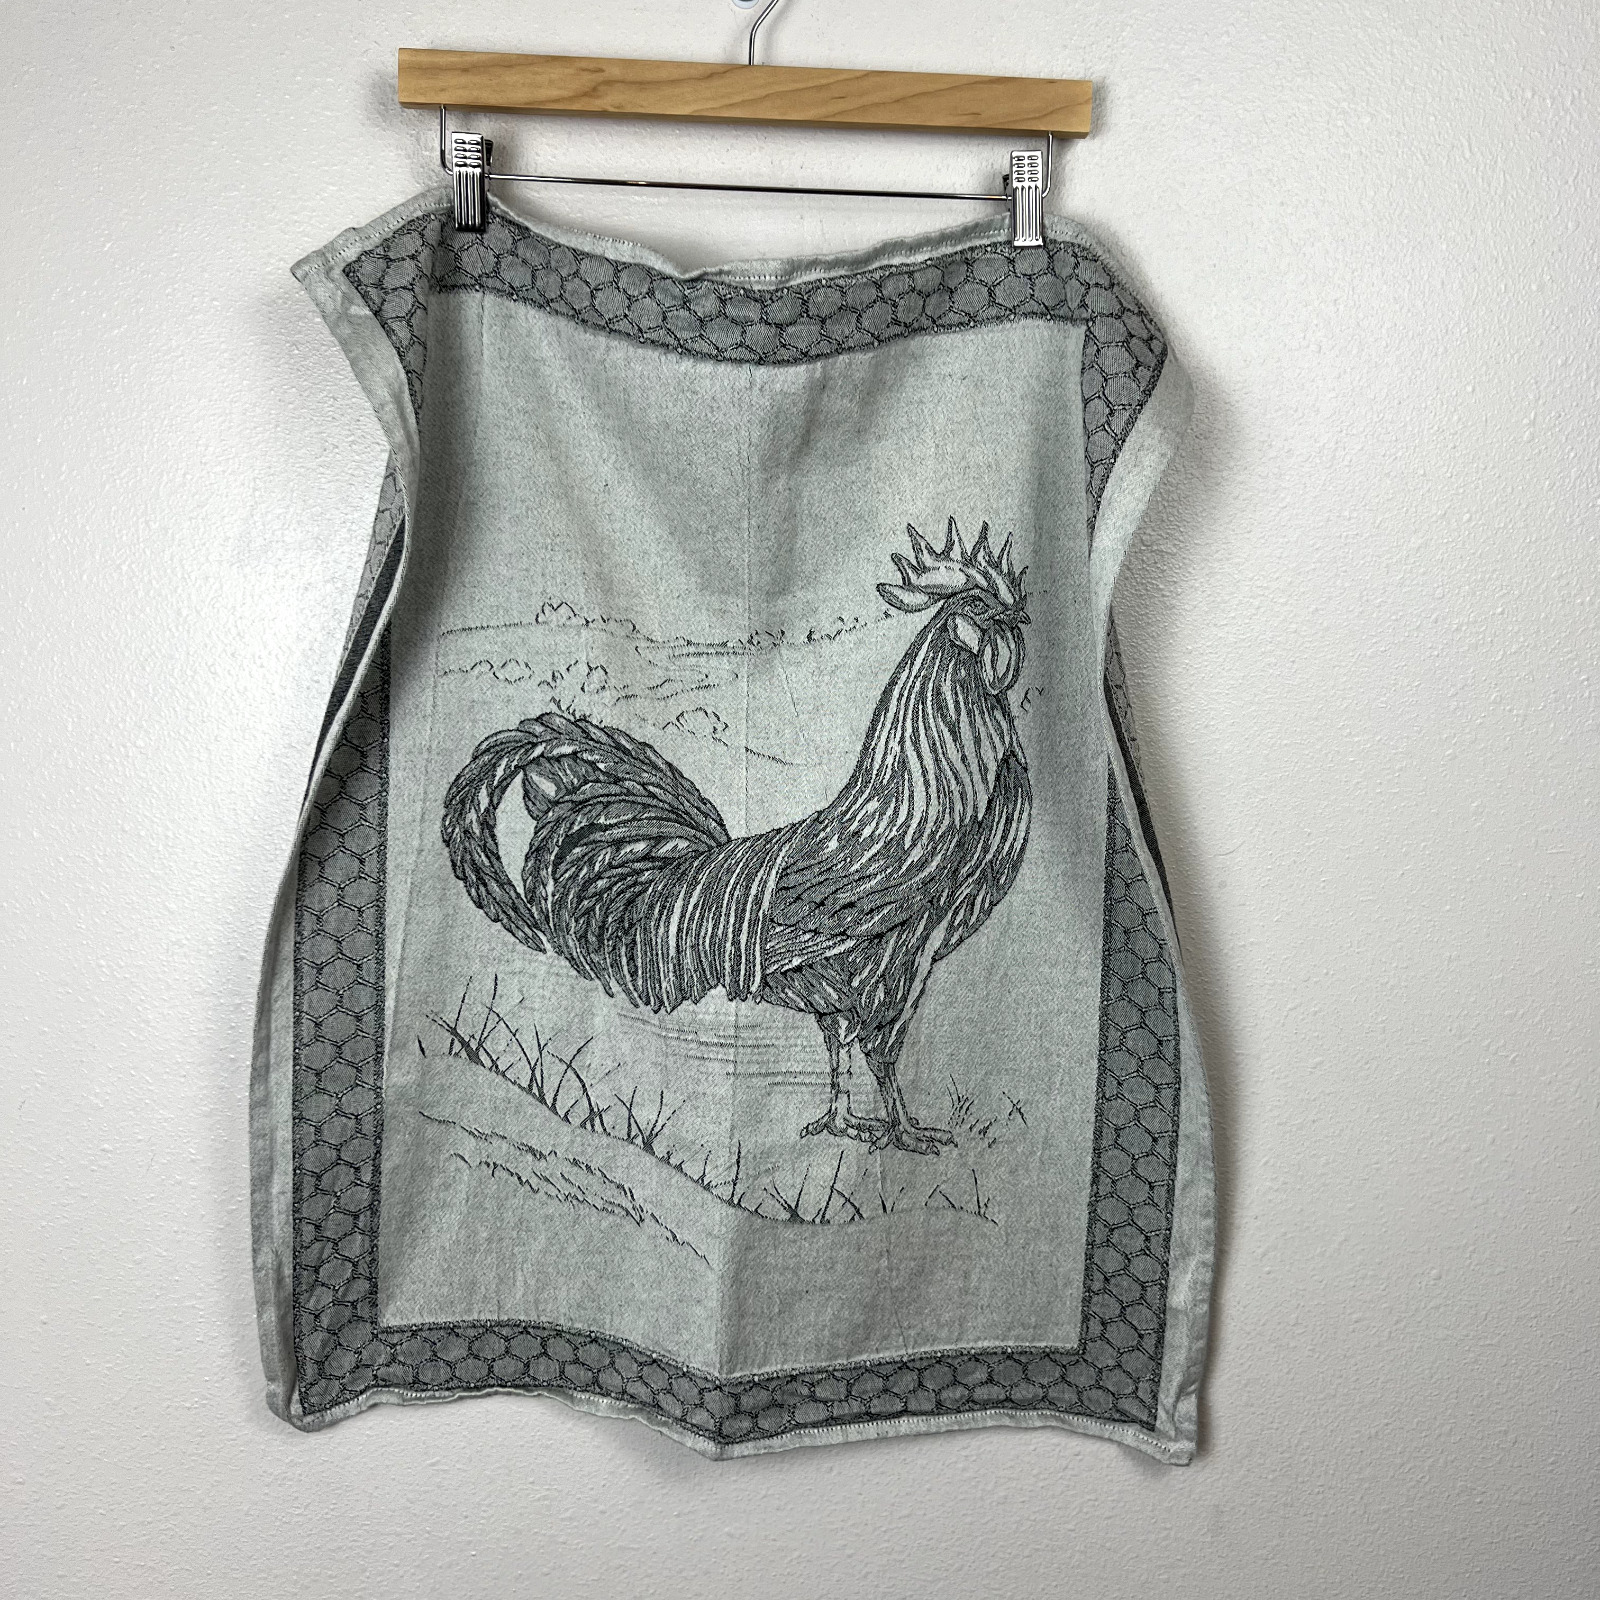 Le Telerie Toscane Tea Towel 100% Cotton Country Rooster Gray 28X22.5 Italy